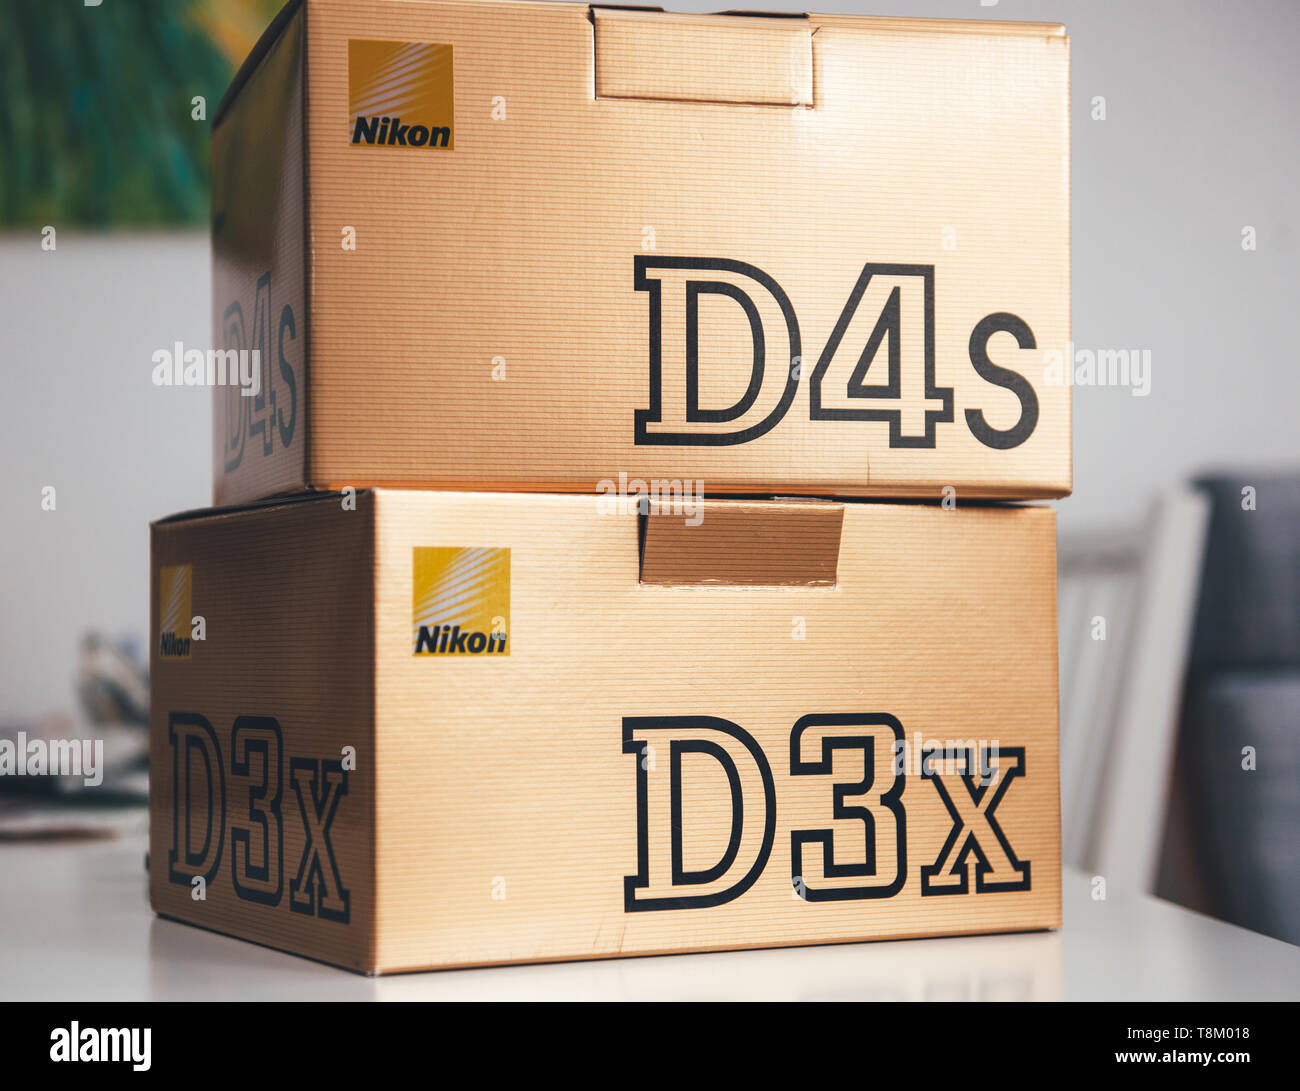 Paris, France - Feb 28, 2017: Cardboard boxes packs with new professional Nikon D3X DSLR and D4s cameras new professional equipment for photo studio  Stock Photo